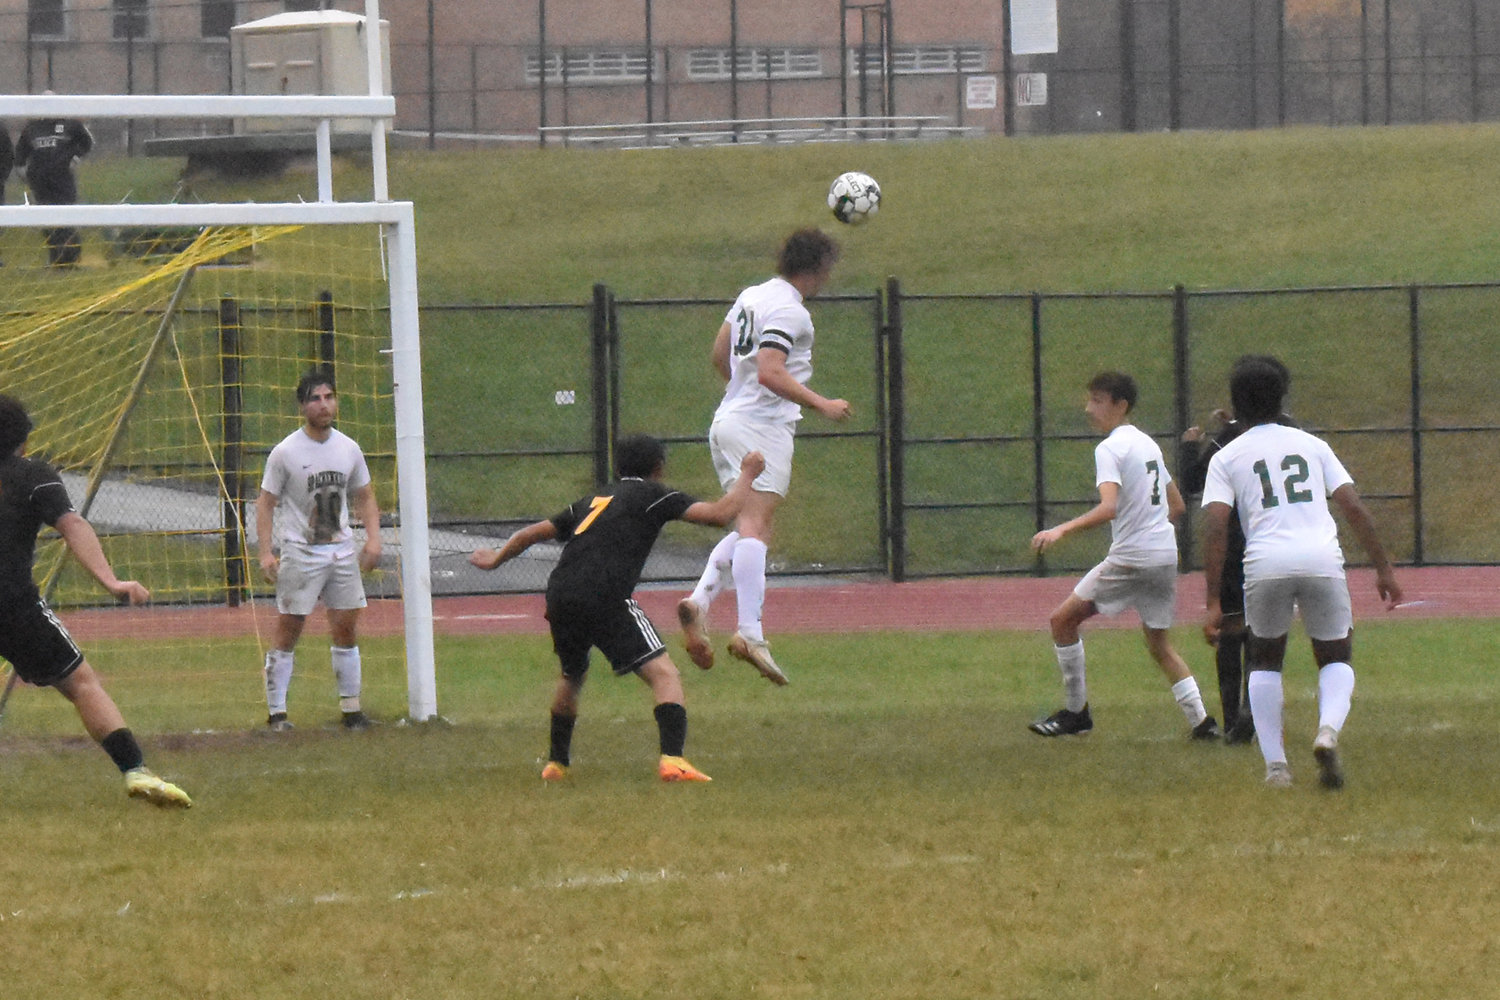 Spackenkill’s defense kept Fallsburg out of the goal for the entirety of the game, especially No. 30, who used his head to redirect a corner kick away from the goal.